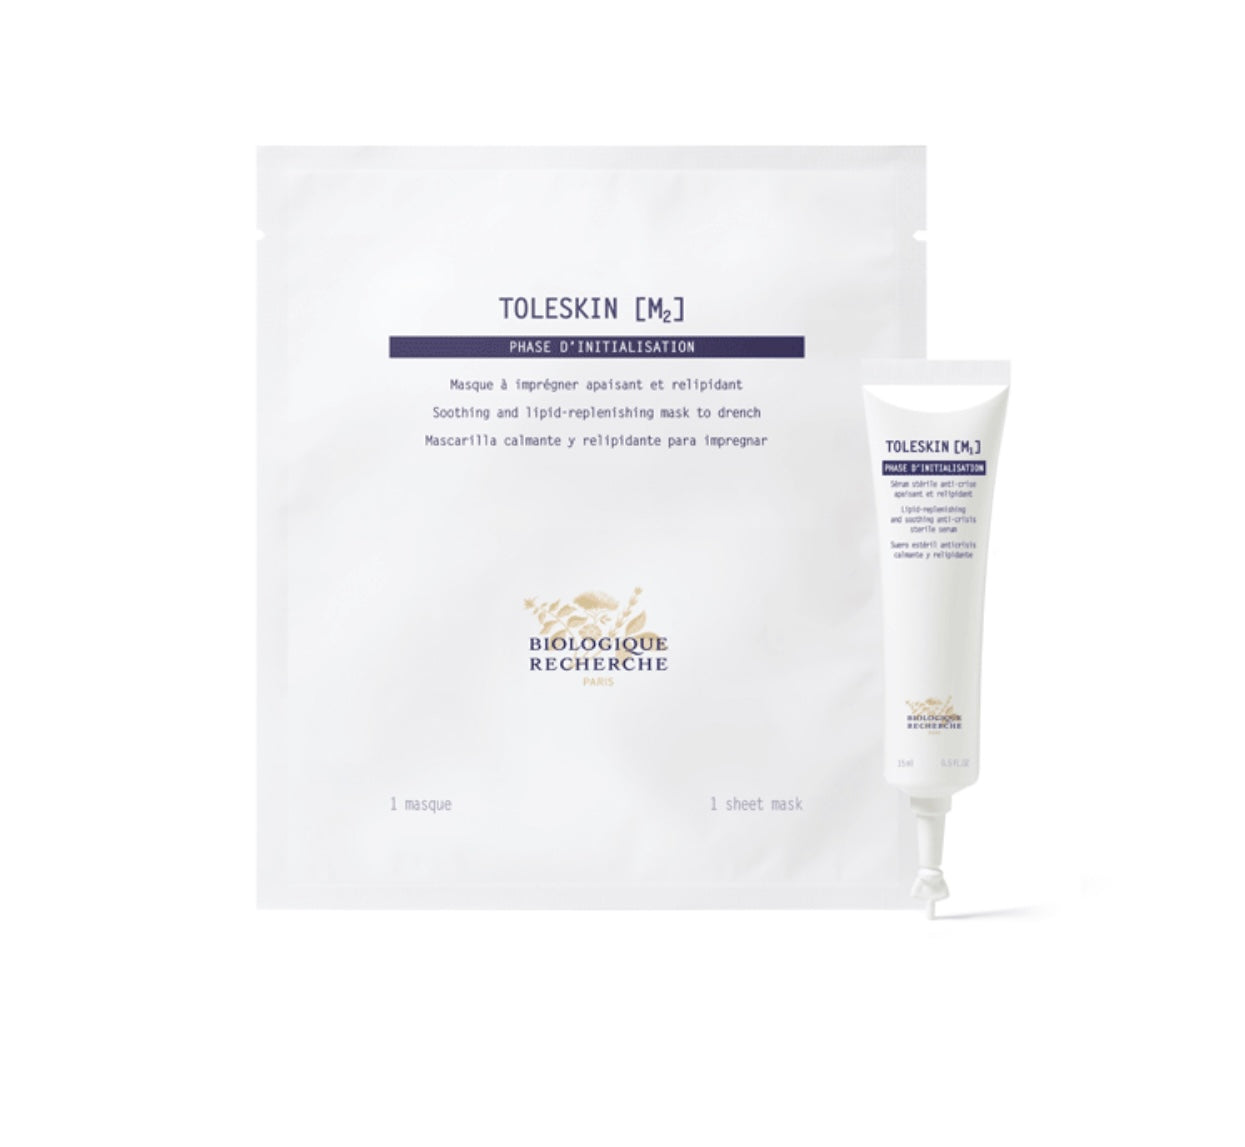 Biologique Recherche - TOLESKIN [M] - Anti-crisis soothing and lipid-replenishing mask and sterile serum